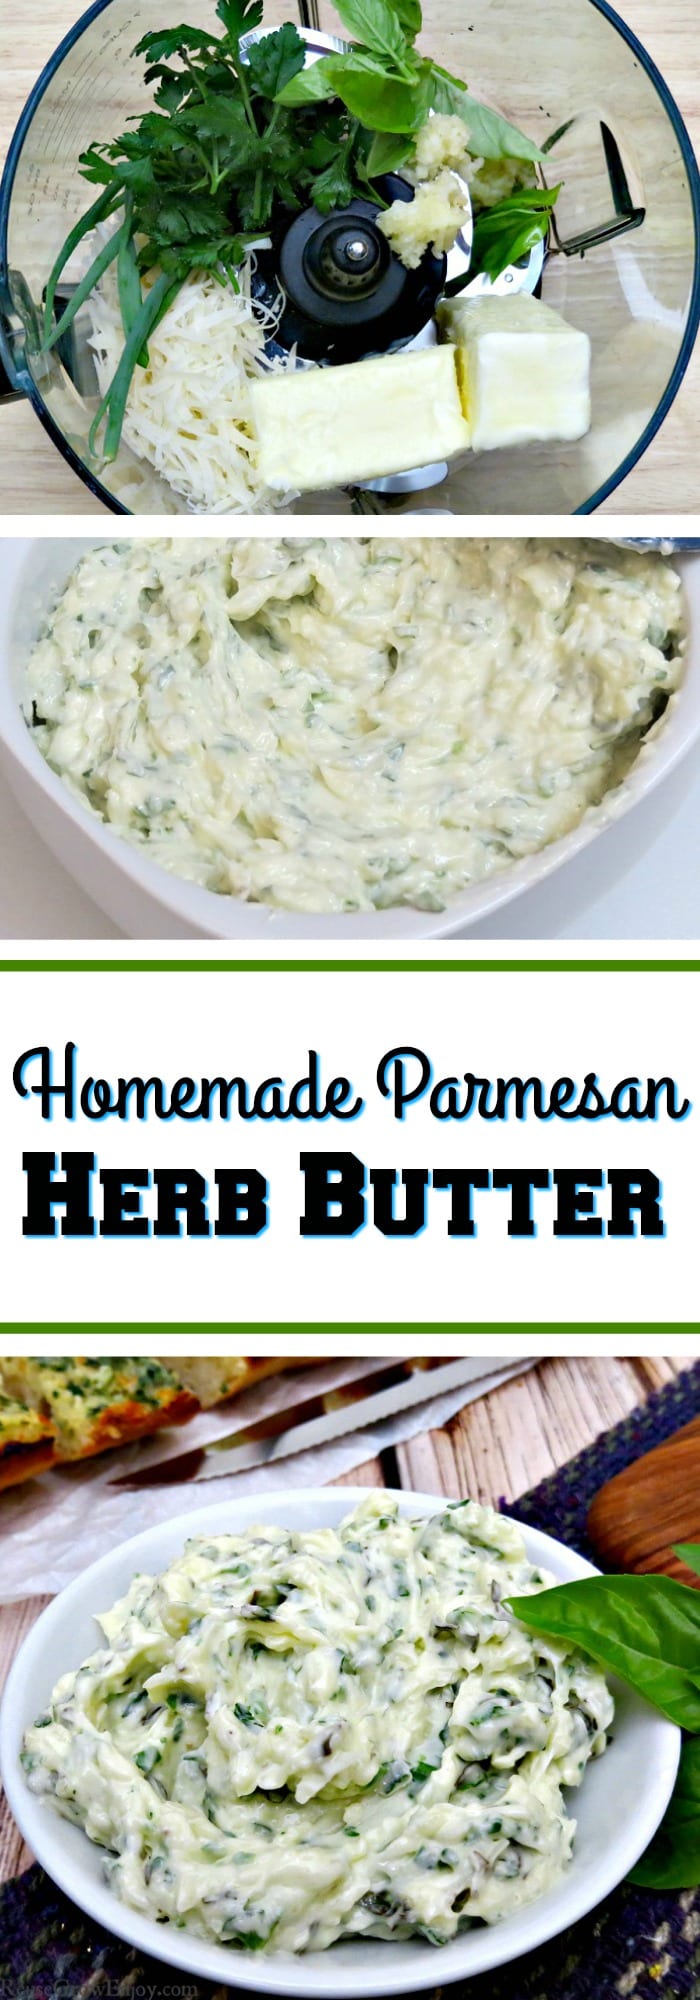 No need to buy pricey herb butter at the store when it is this easy to make! I am going to show you how to make this homemade Parmesan Herb Butter!